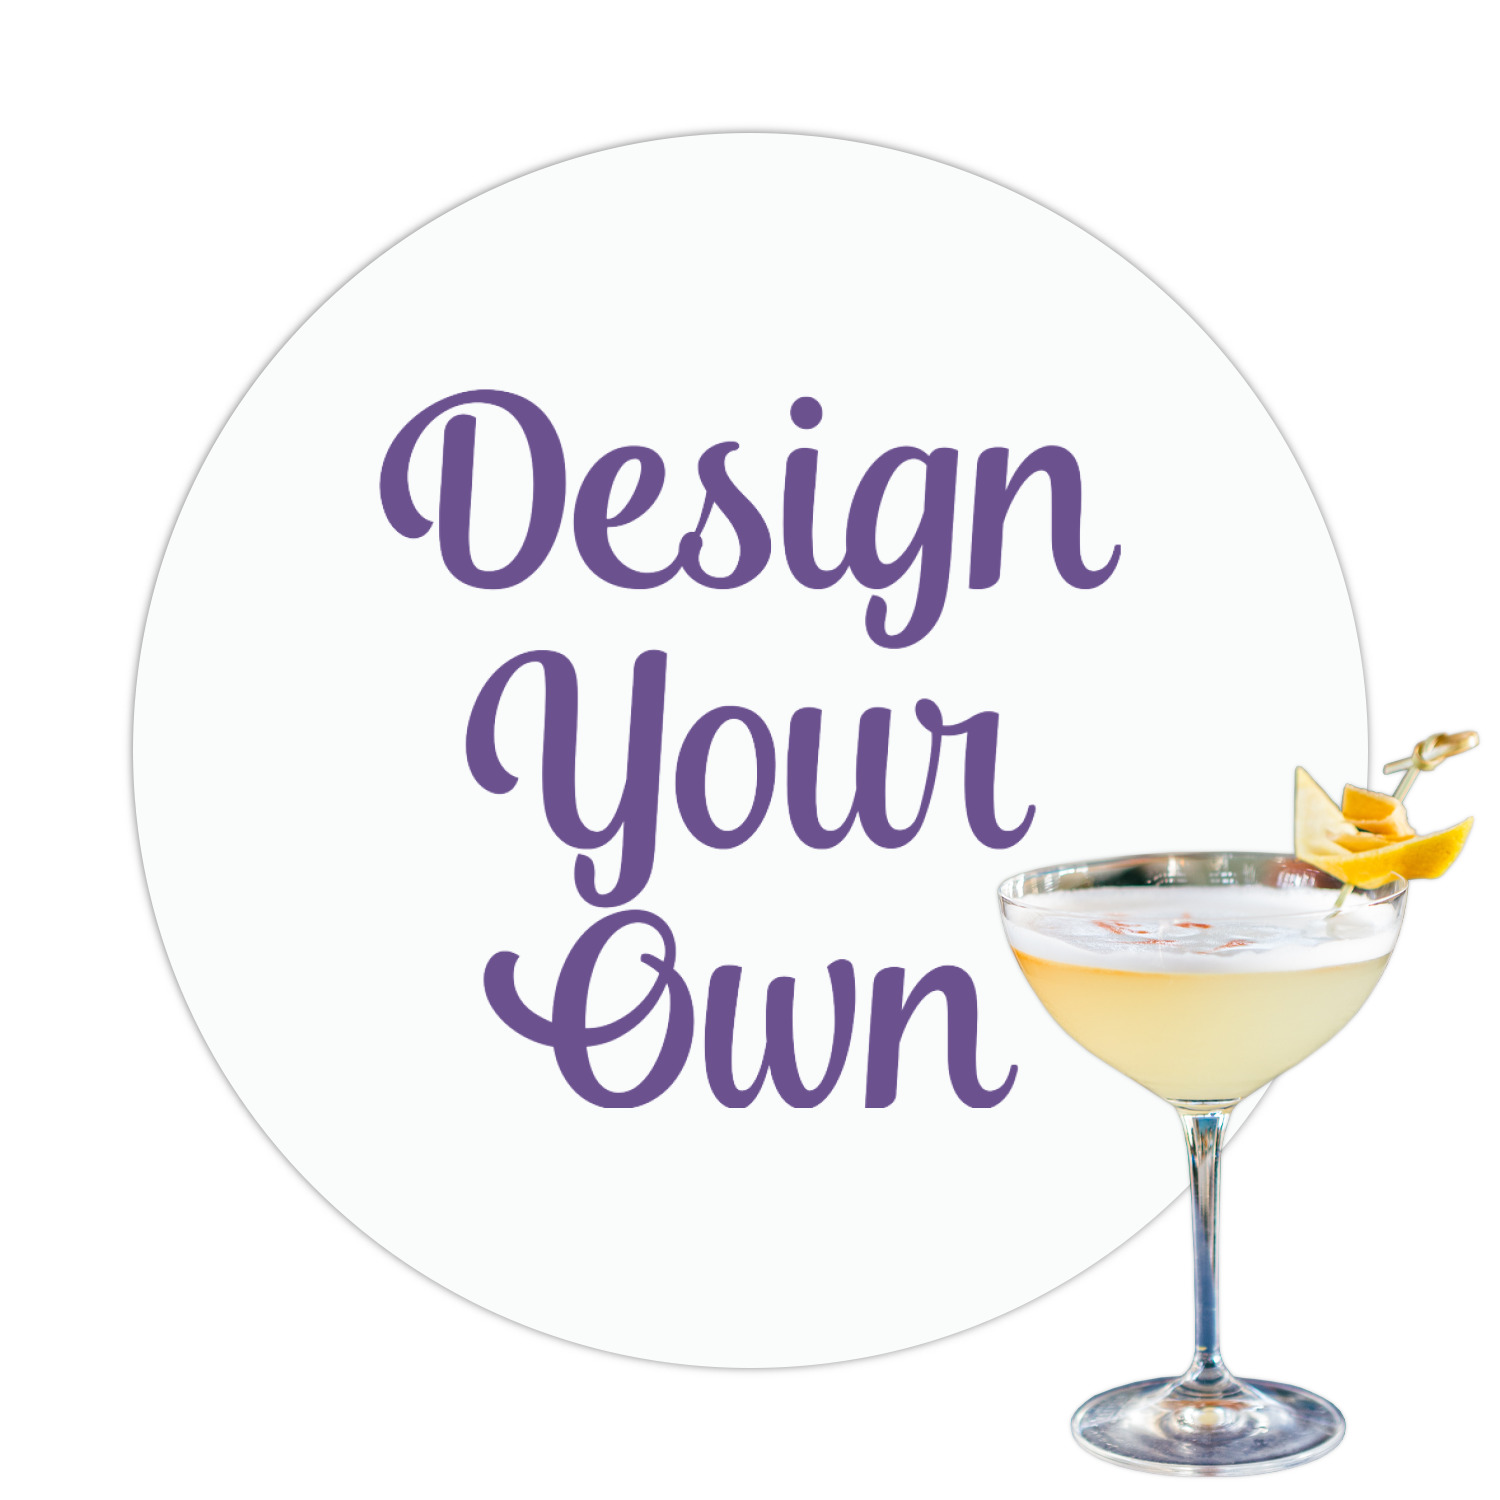 https://www.youcustomizeit.com/common/MAKE/965833/Design-Your-Own-Drink-Topper-Large-Single-with-Drink.jpg?lm=1681854955